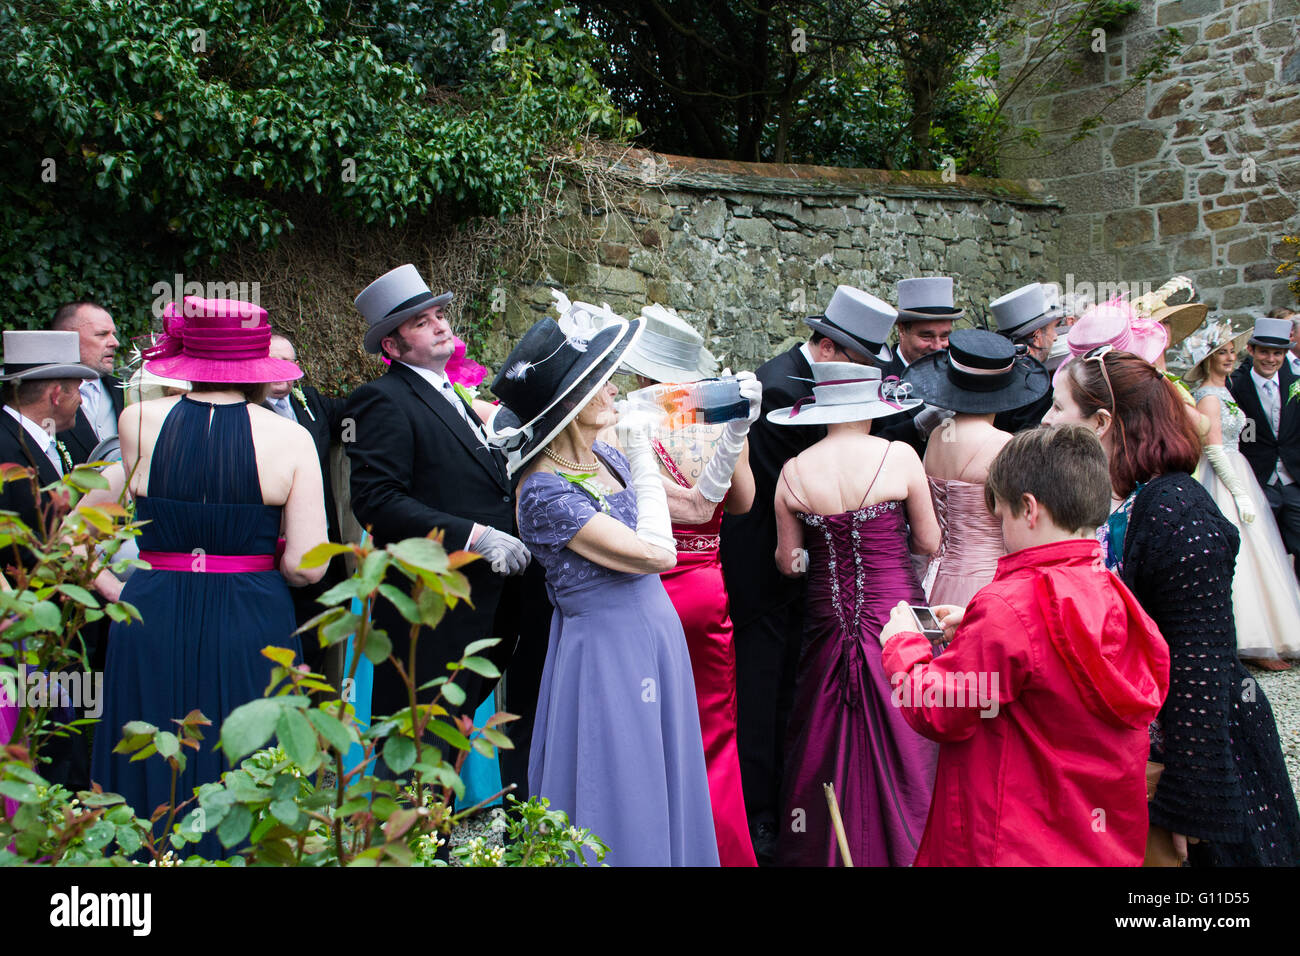 Helson, Cornwall, UK. 7th May 2016. Some eighty couples dance through the streets of Helston, entering selected houses and shops to drive out the darkness of winter and bring in the light of spring. The music to the Furry dance is played by Helston Town band, was made into a vocal version 'The floral dance' by the late Sir Terry Wogan. The colourful Pageant, known as Hal an Tow, tells the history of Helston with the participating characters singing about the challenge of the Spanish Armada, the English patron saint, St. Credit:  Simon Maycock/Alamy Live News Stock Photo